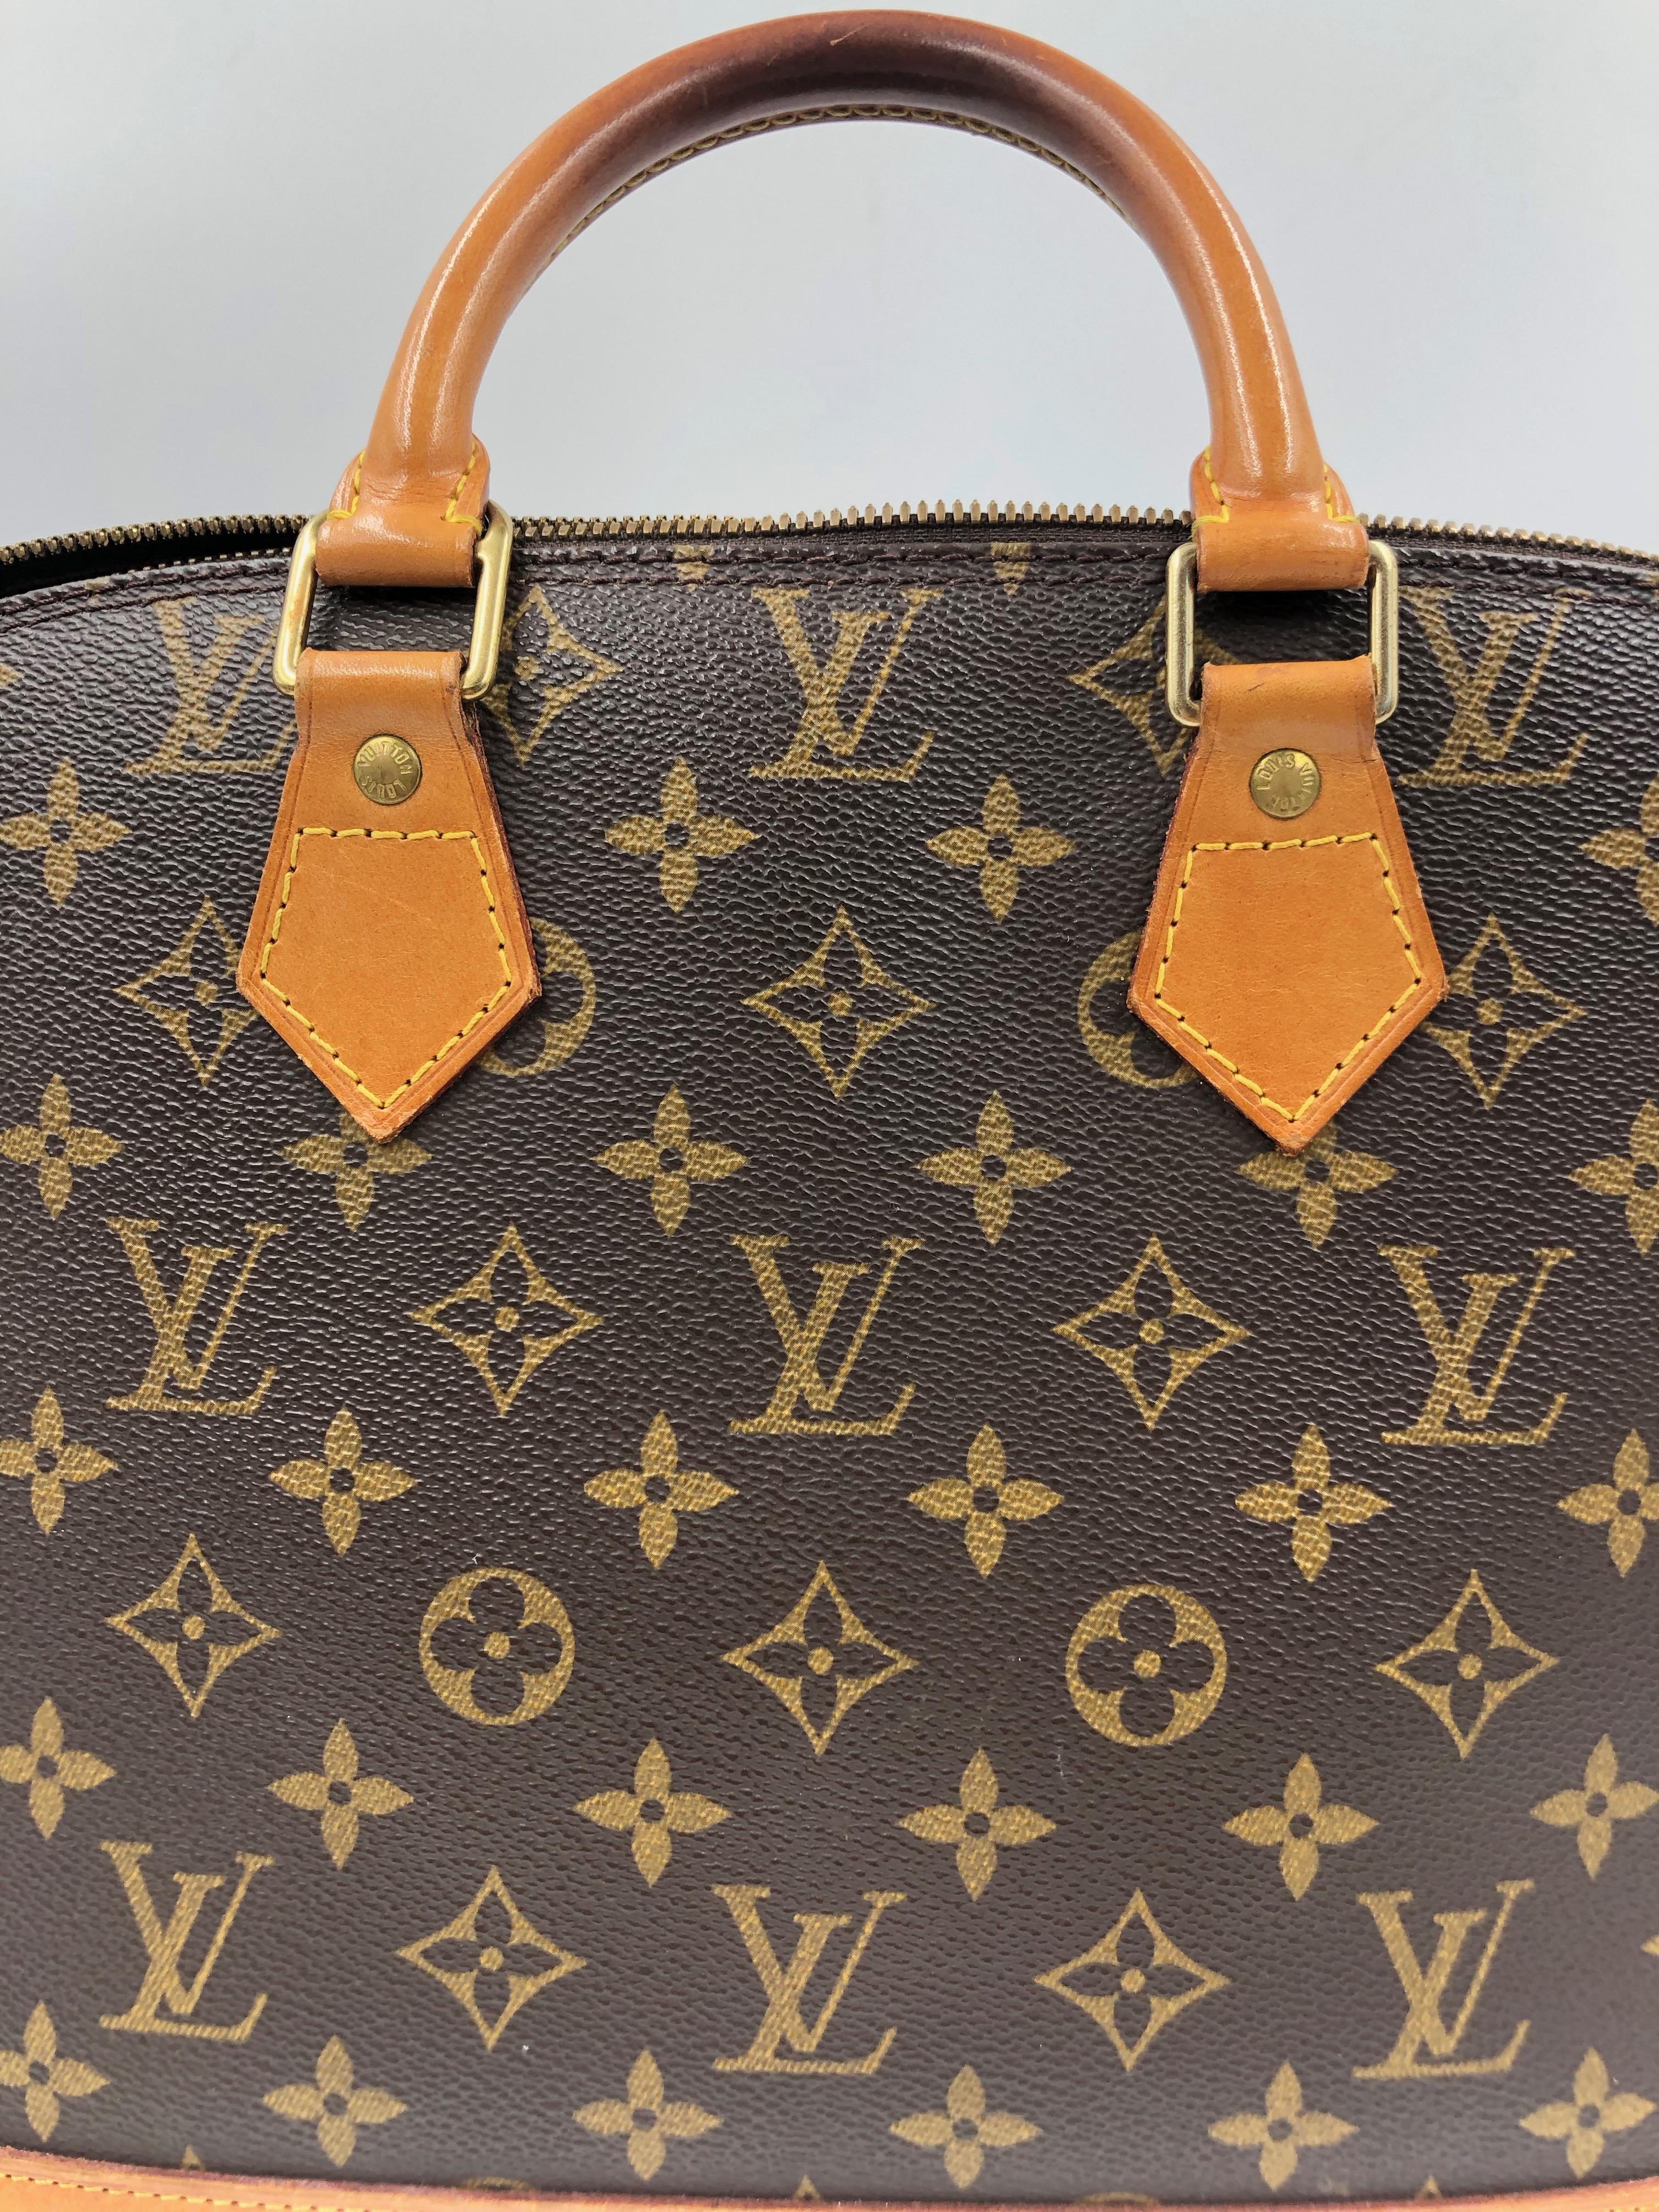 Louis Vuitton Brown Monogram Canvas Alma Bag with double zip closure. One open pocket at interior, double rolled leather handles and gold-tone hardware. No Lock

*Measurements Taken Flat*
3.25